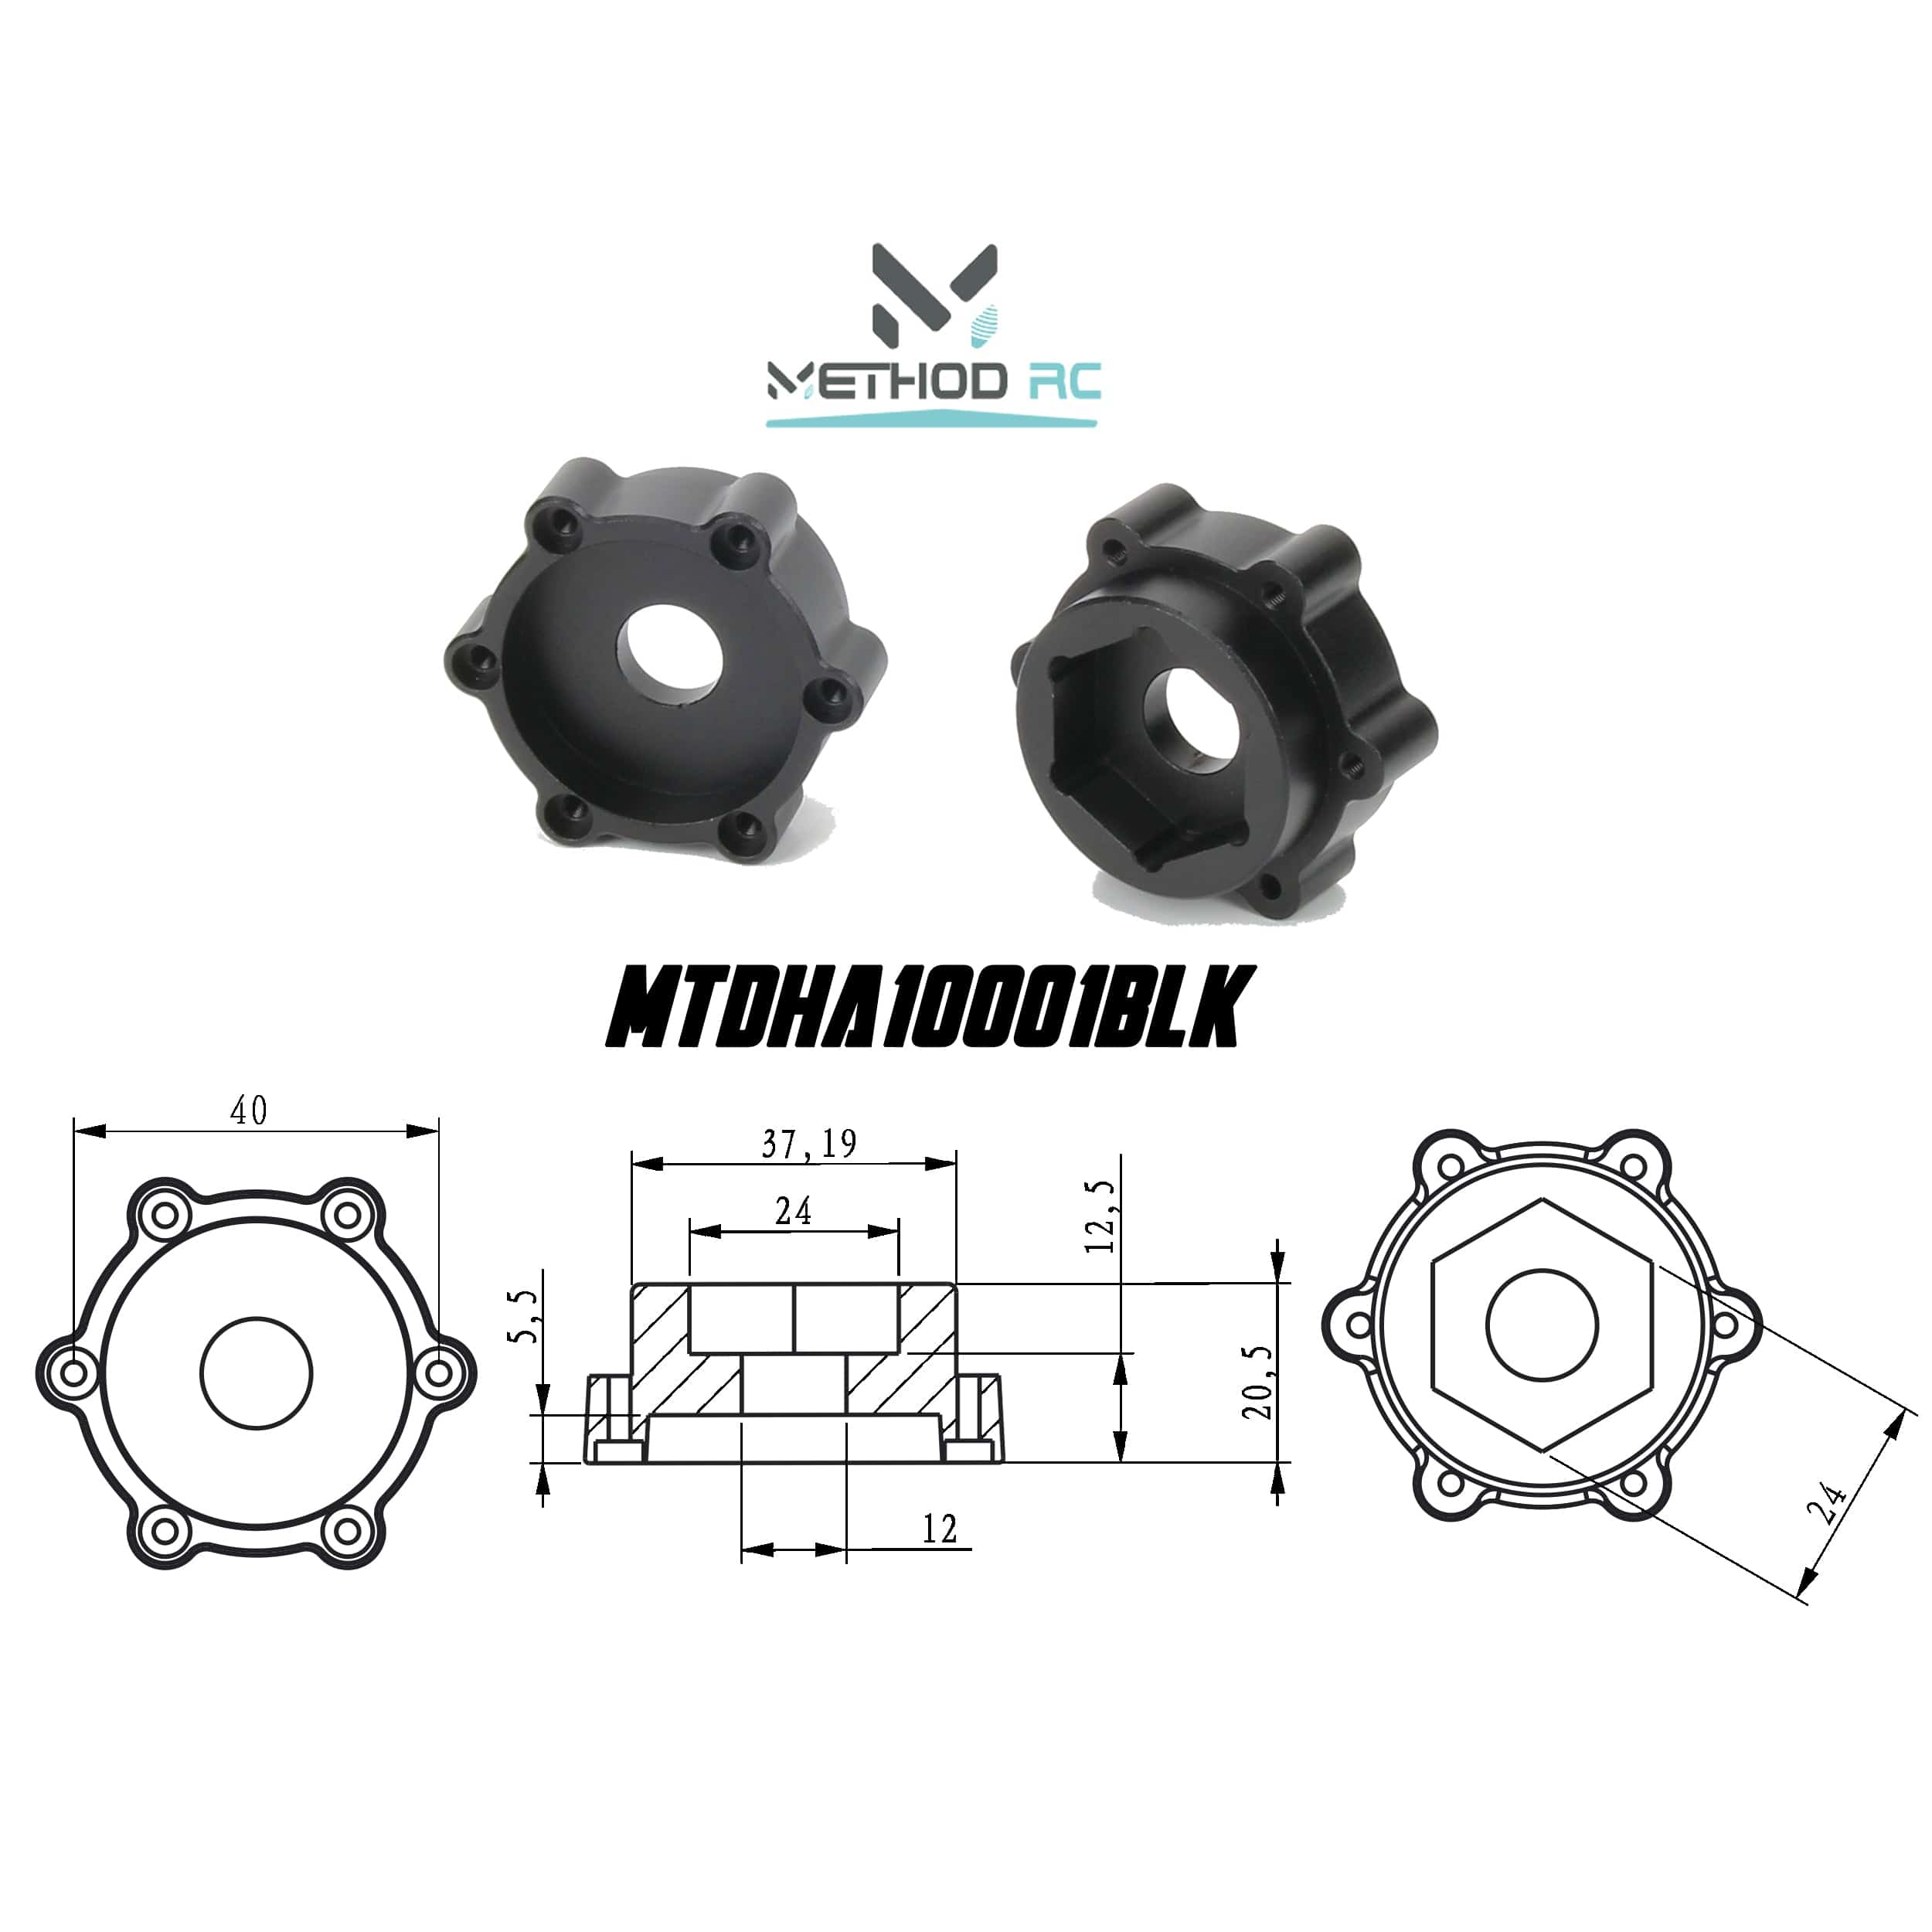 Method RC Wheel Hexes 6 X 40mm / 12.5mm Offset 24mm Hex Adaptor, for use with Traxxas XRT/X-MAXX, (2pcs)